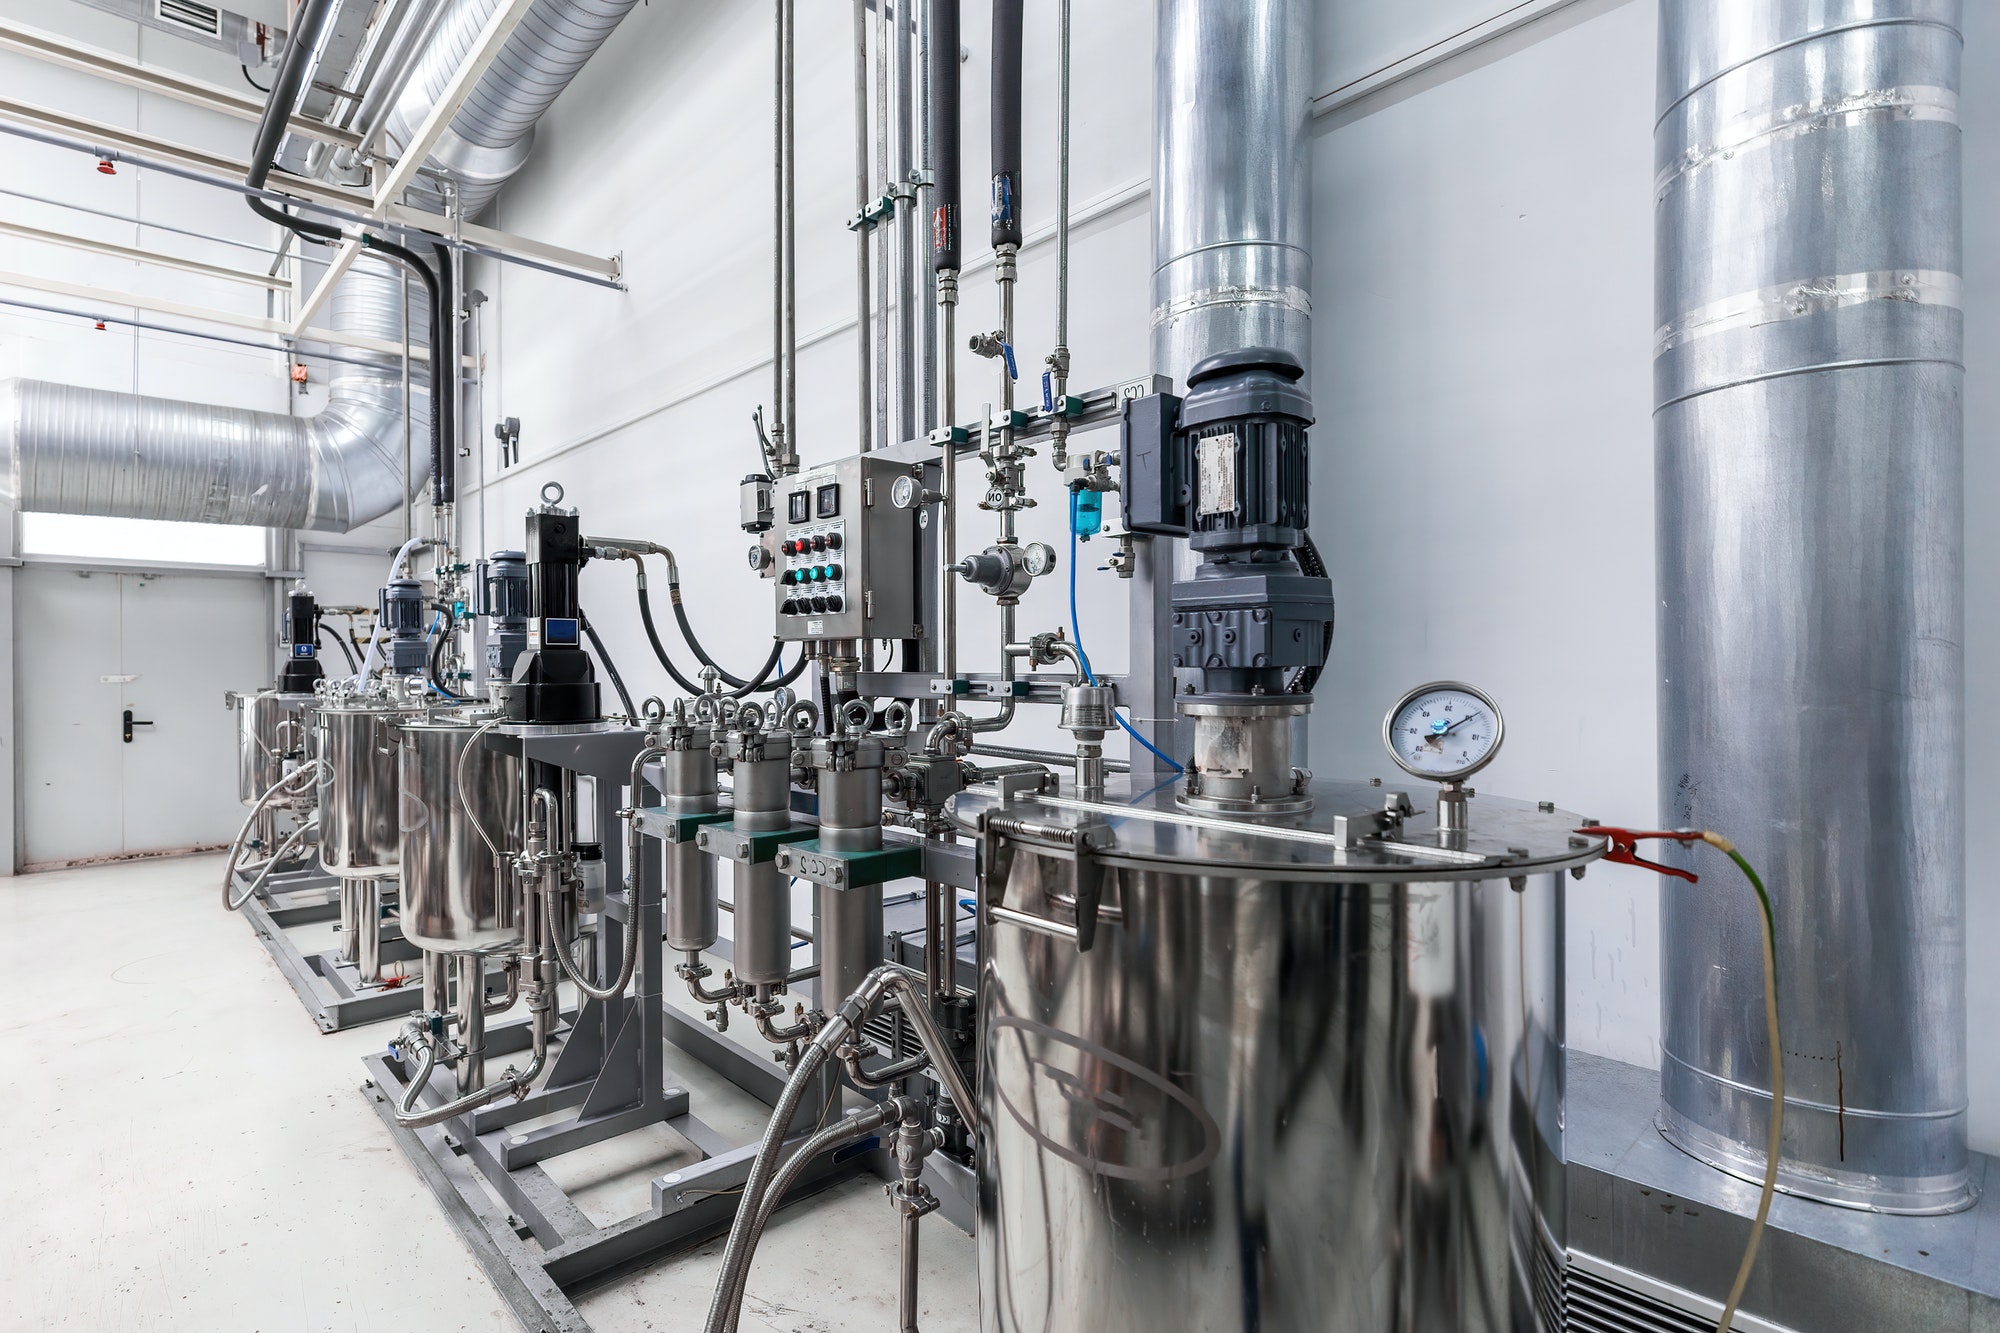 Photo of pipes and tanks. Chemistry and medicine production. Pharmaceutical plant. Interior of a